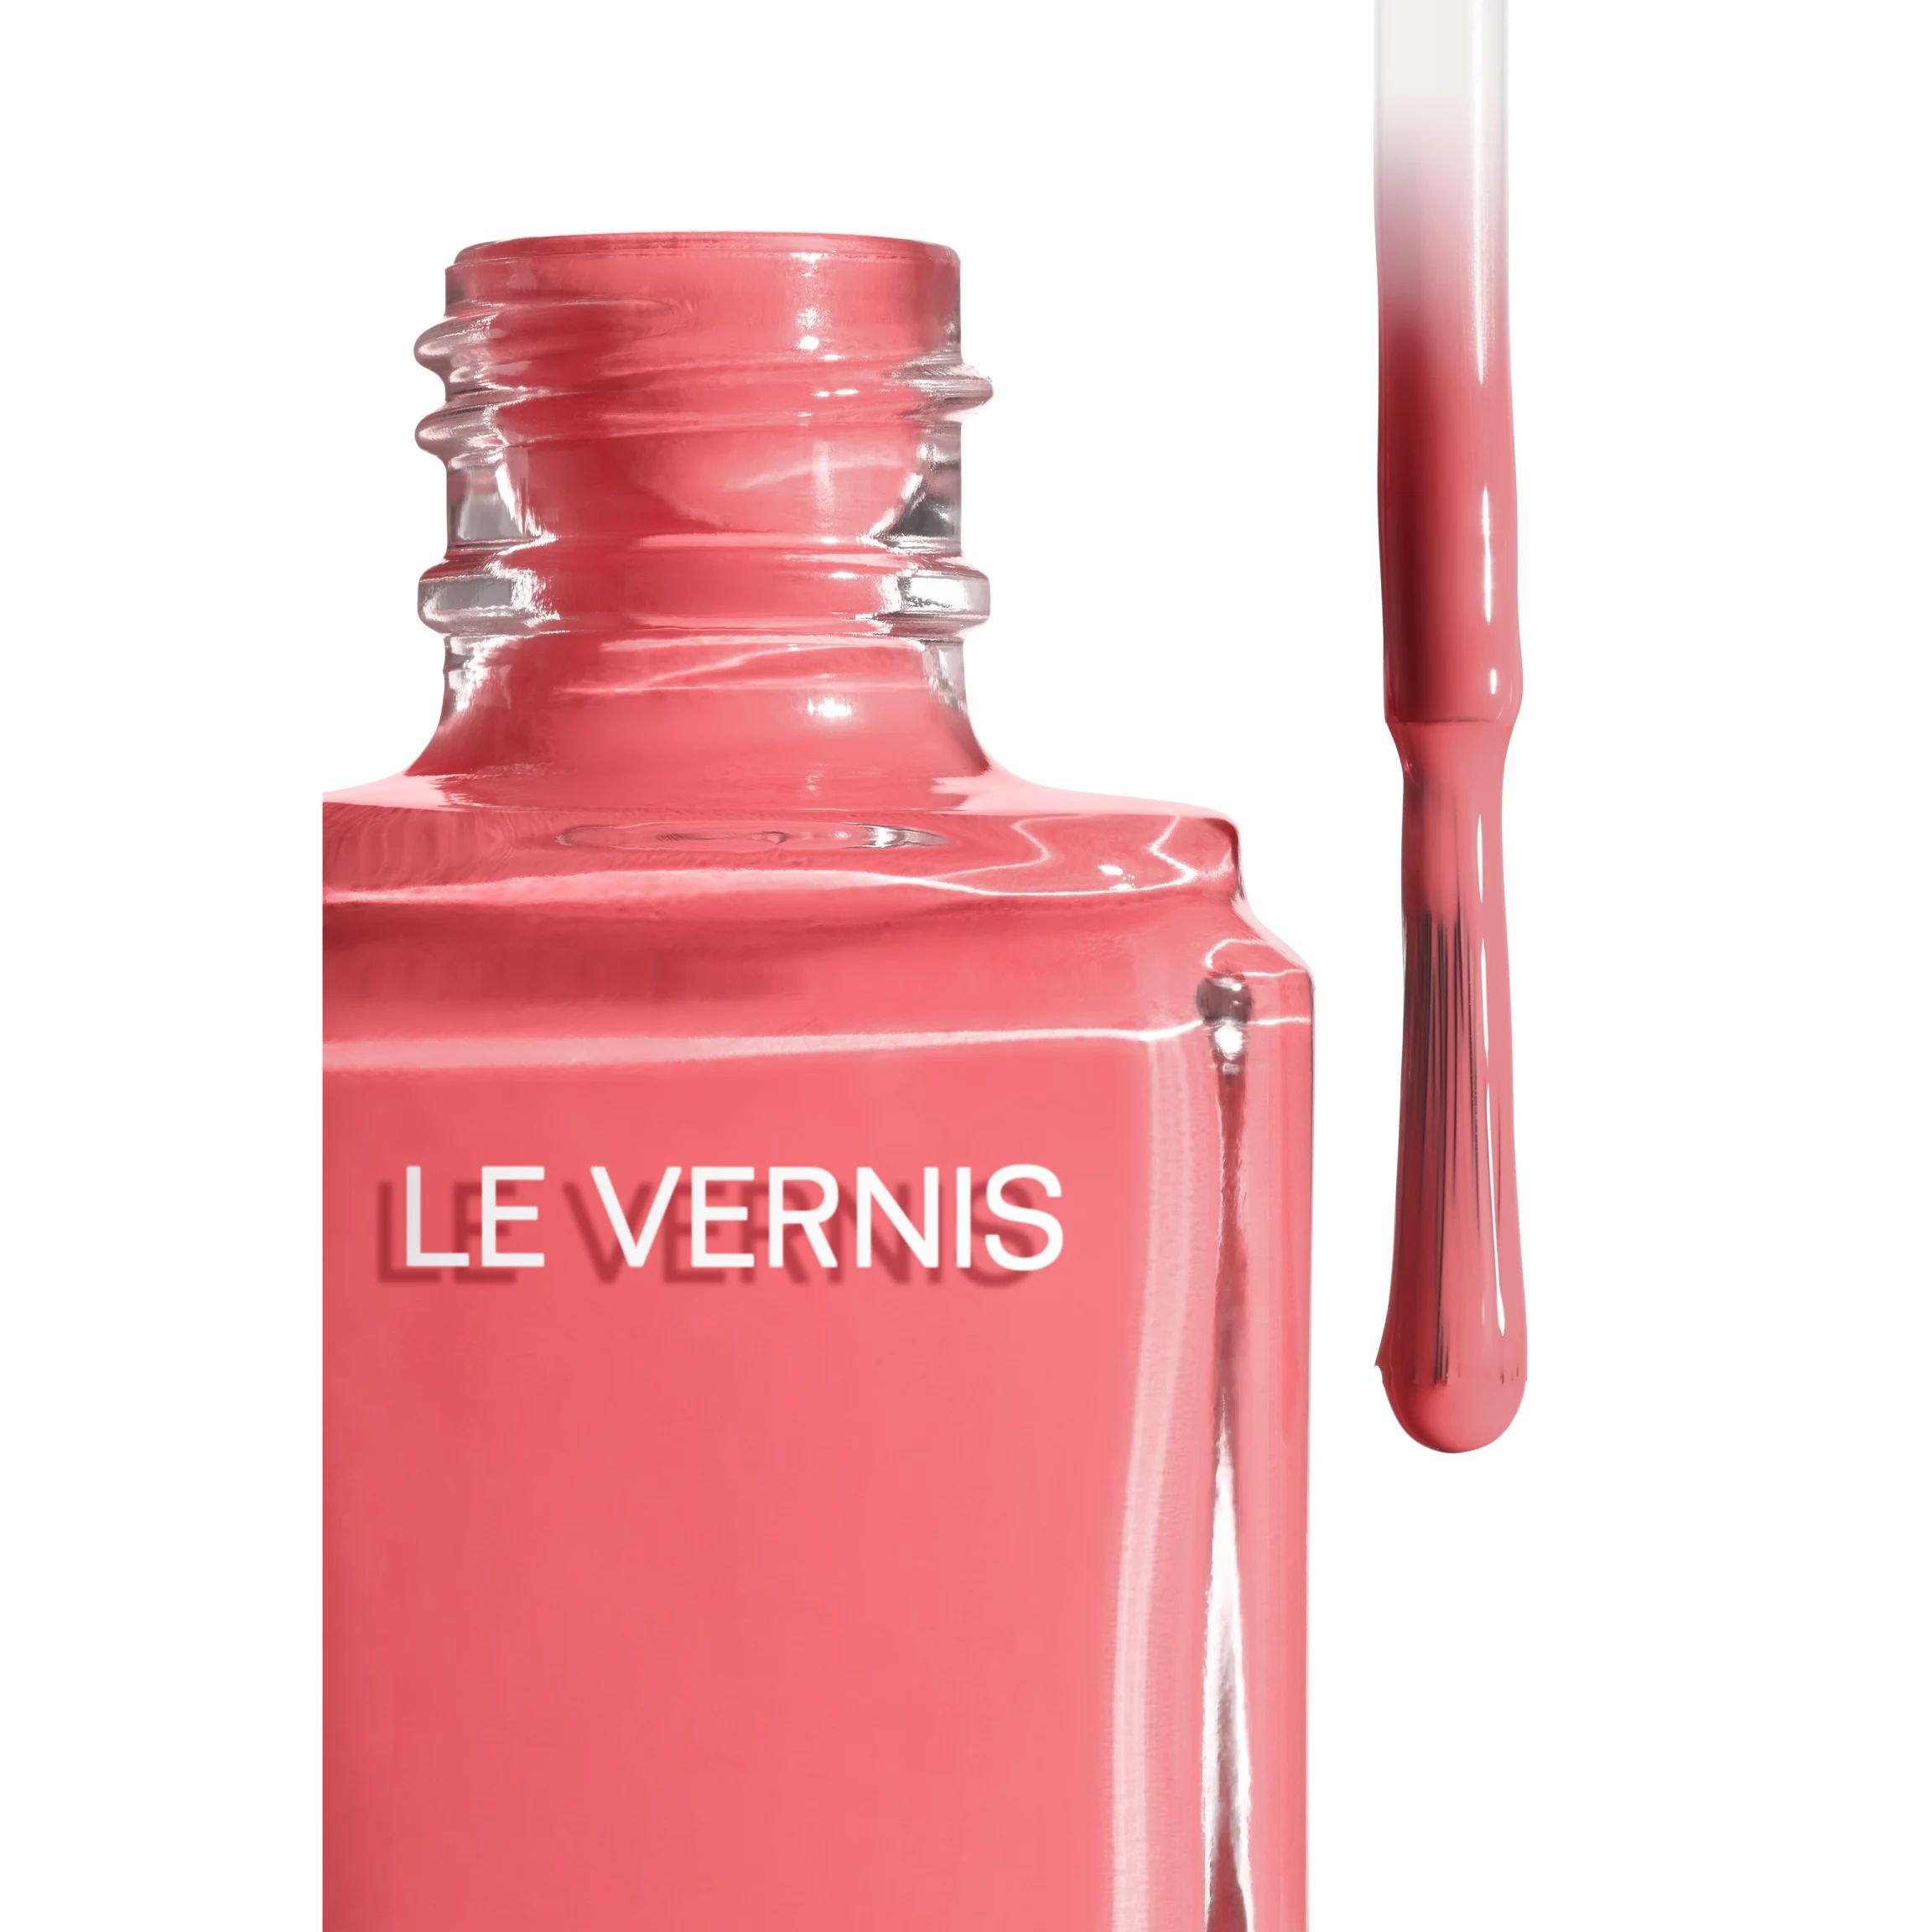 LE VERNIS Longwear nail colour 925 - Rose coquillage | CHANEL | Chanel, Inc. (US)